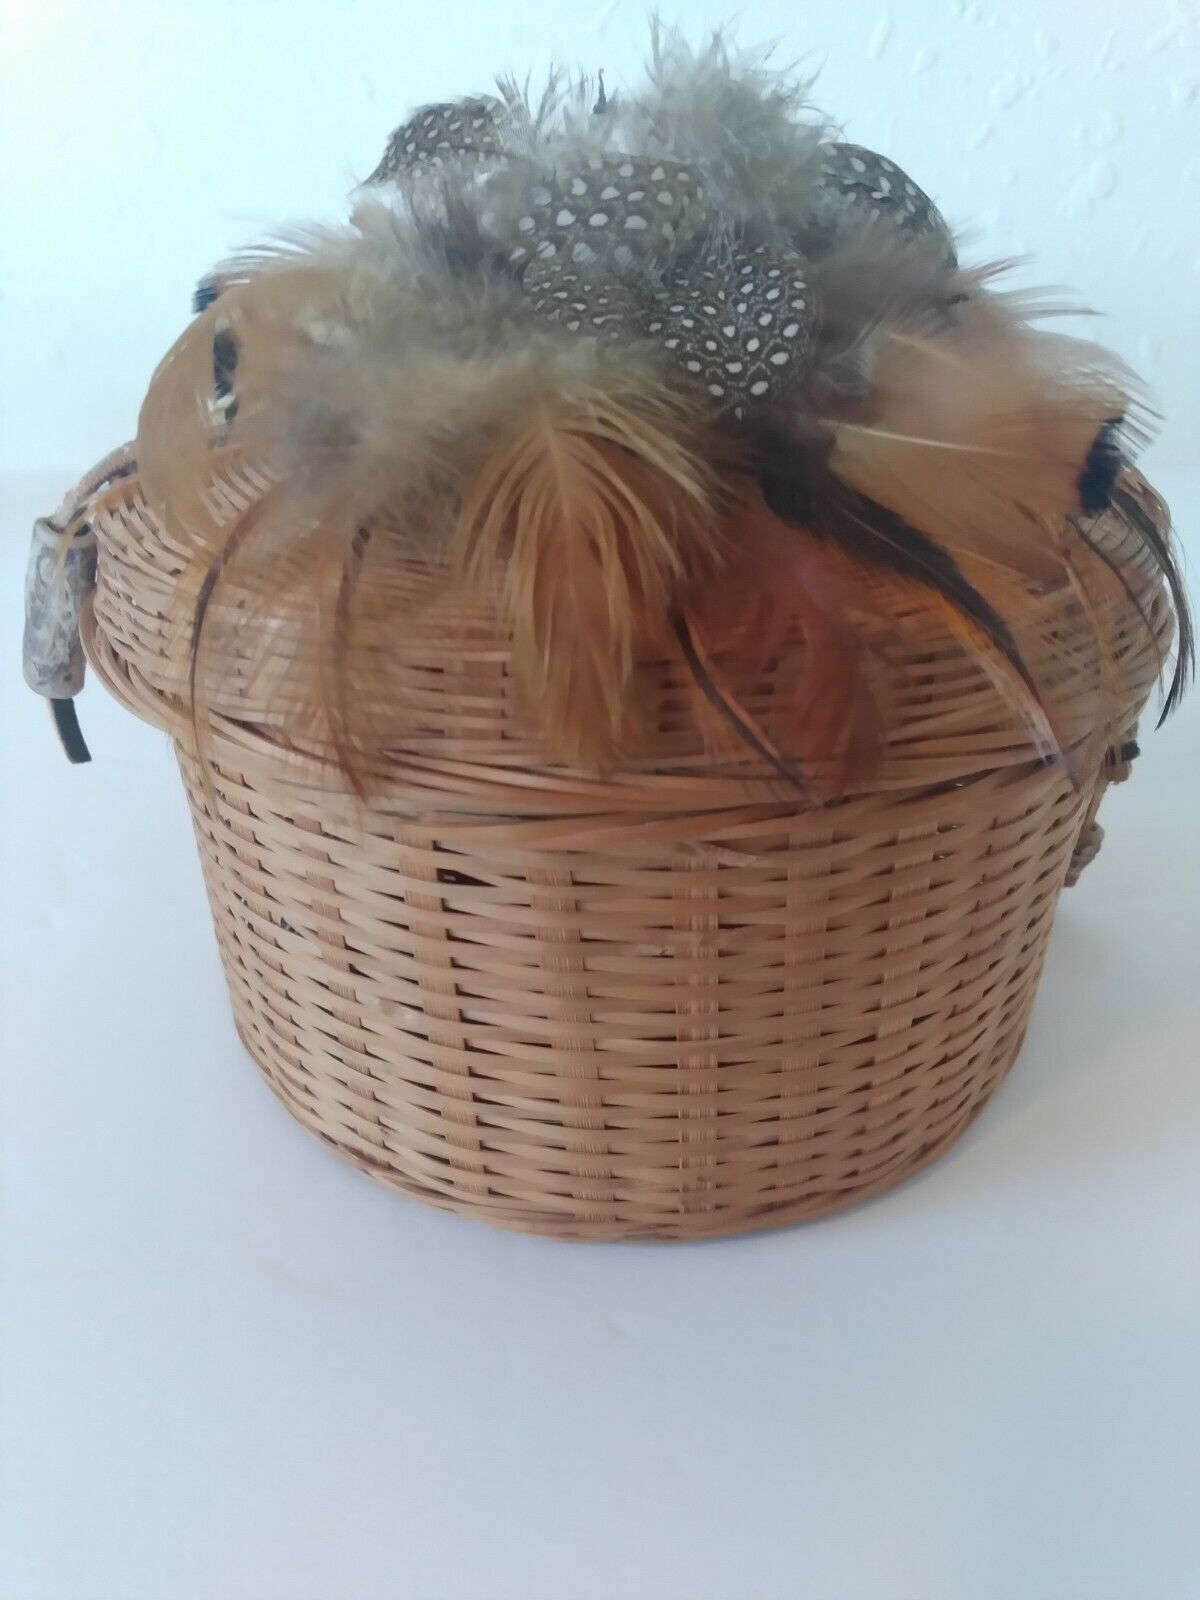 Vintage Hand Woven Basket Real Feathers Leather Strings & Engraved Stones On Lid